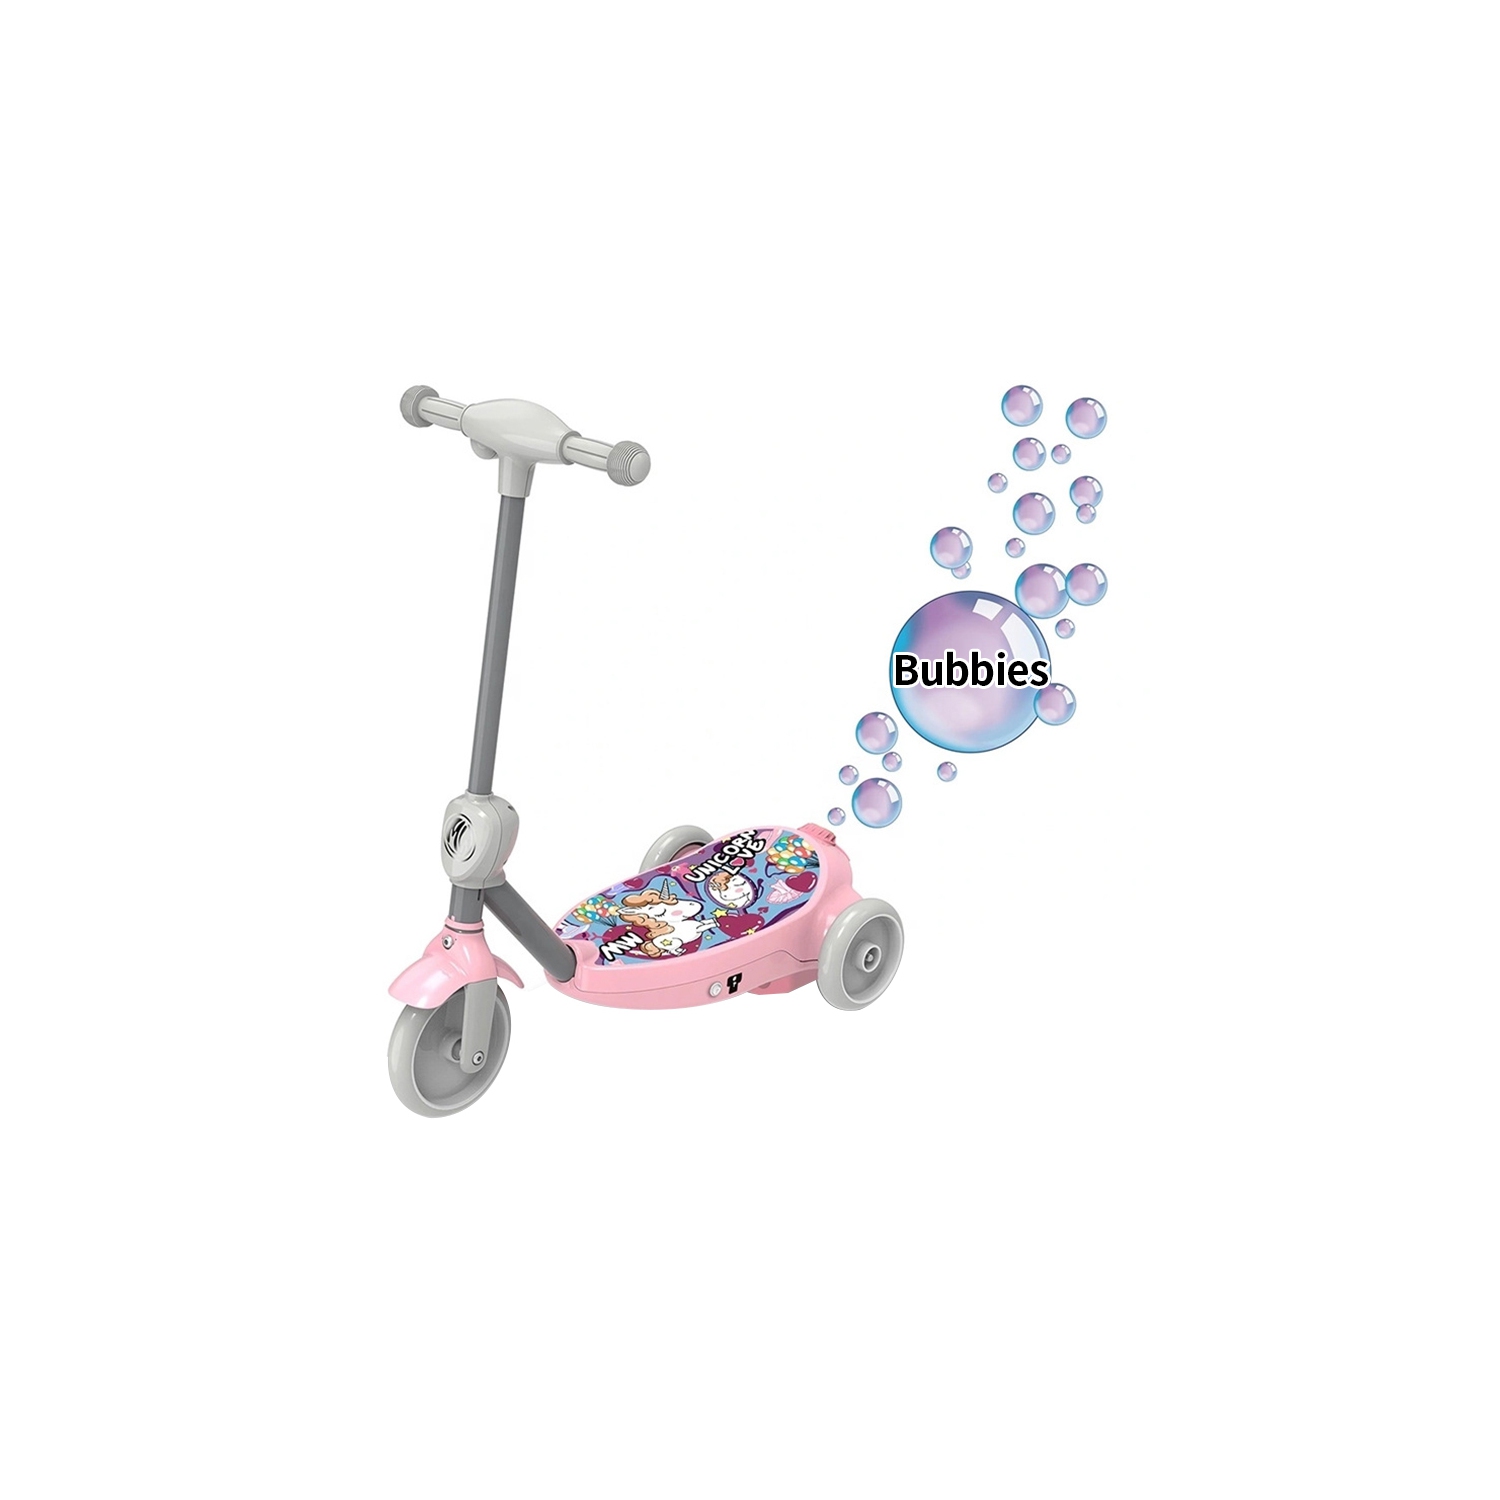 WINGOMART ELECTRIC SCOOTER 6V 2 in 1 Bubble Scooter 2 - 7 years Up to 4KM/H - Princess Pink